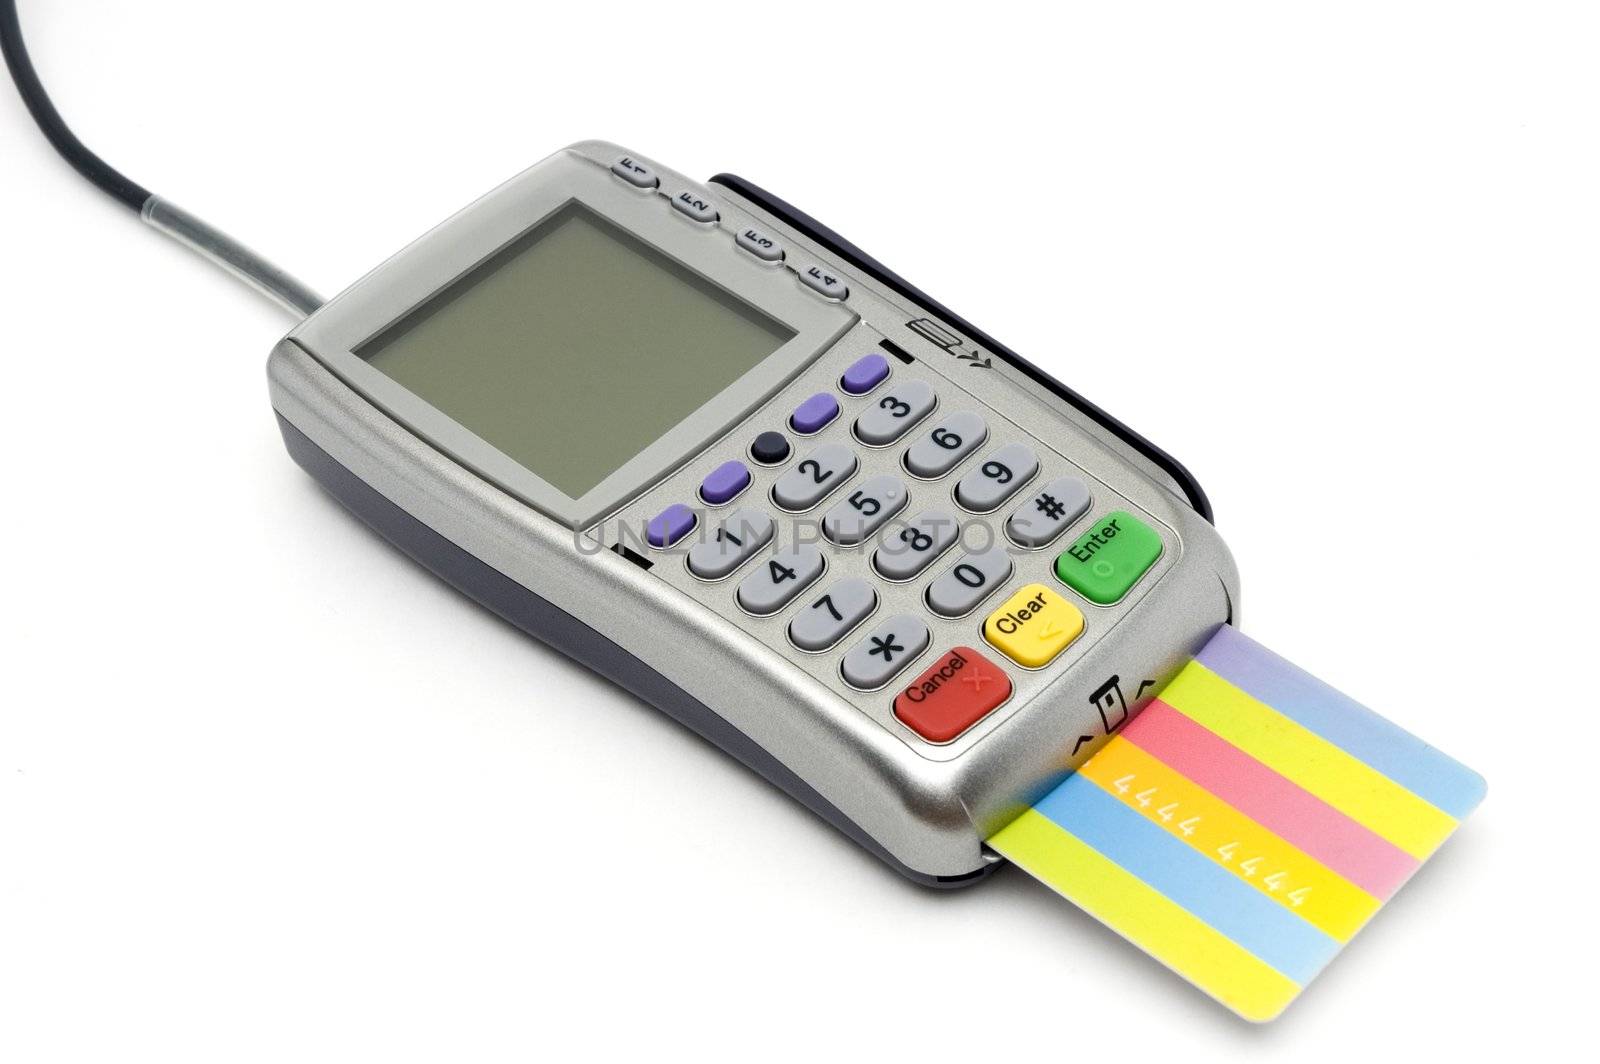 Modern POS terminal with credit card inserted